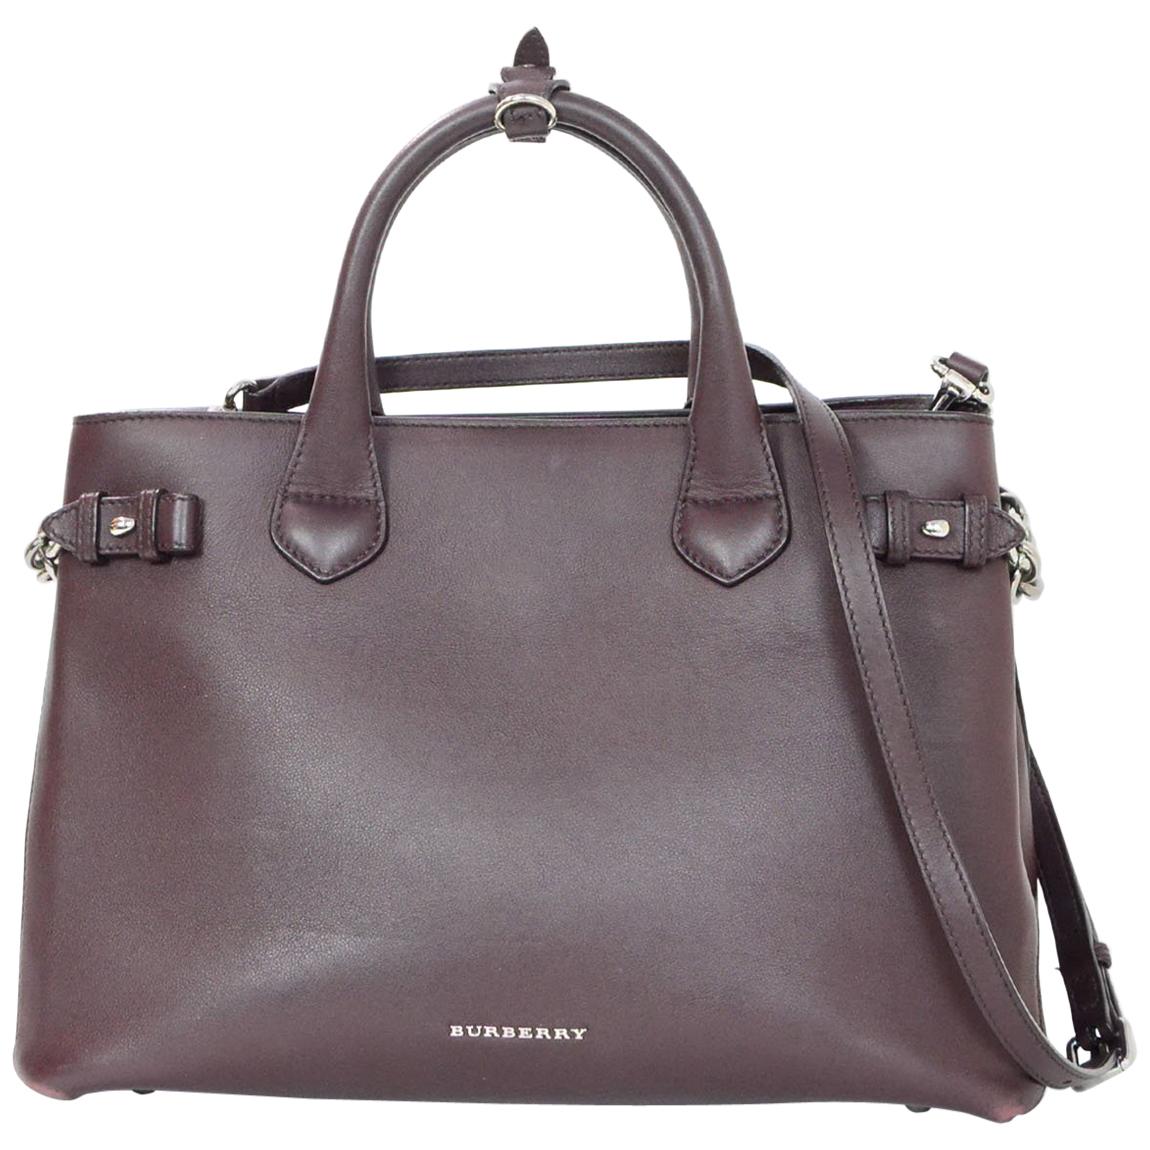 Burberry Brown Leather Banner Satchel Bag with Strap 